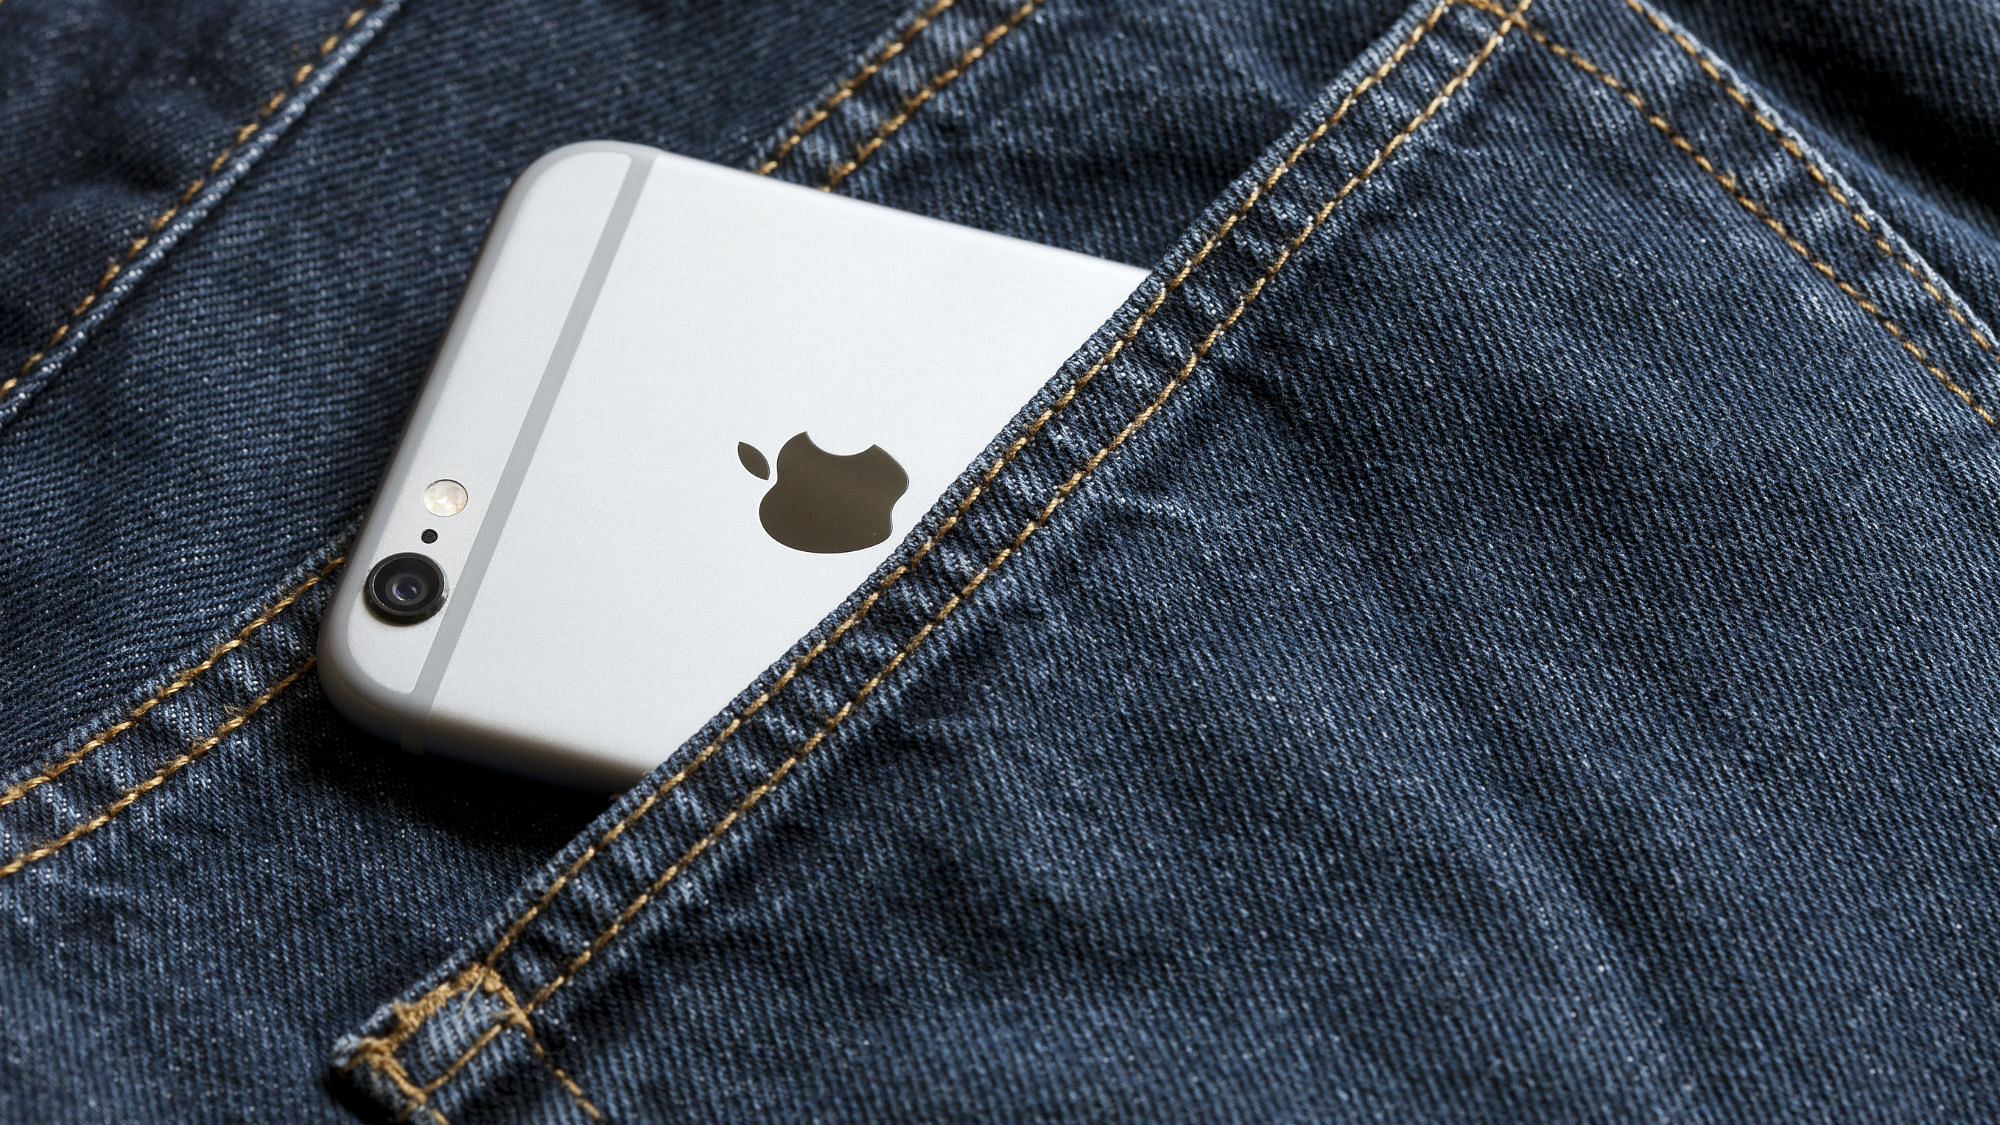 Apple iPhone has lost its charm, will that change next year? (Photo: iStock)